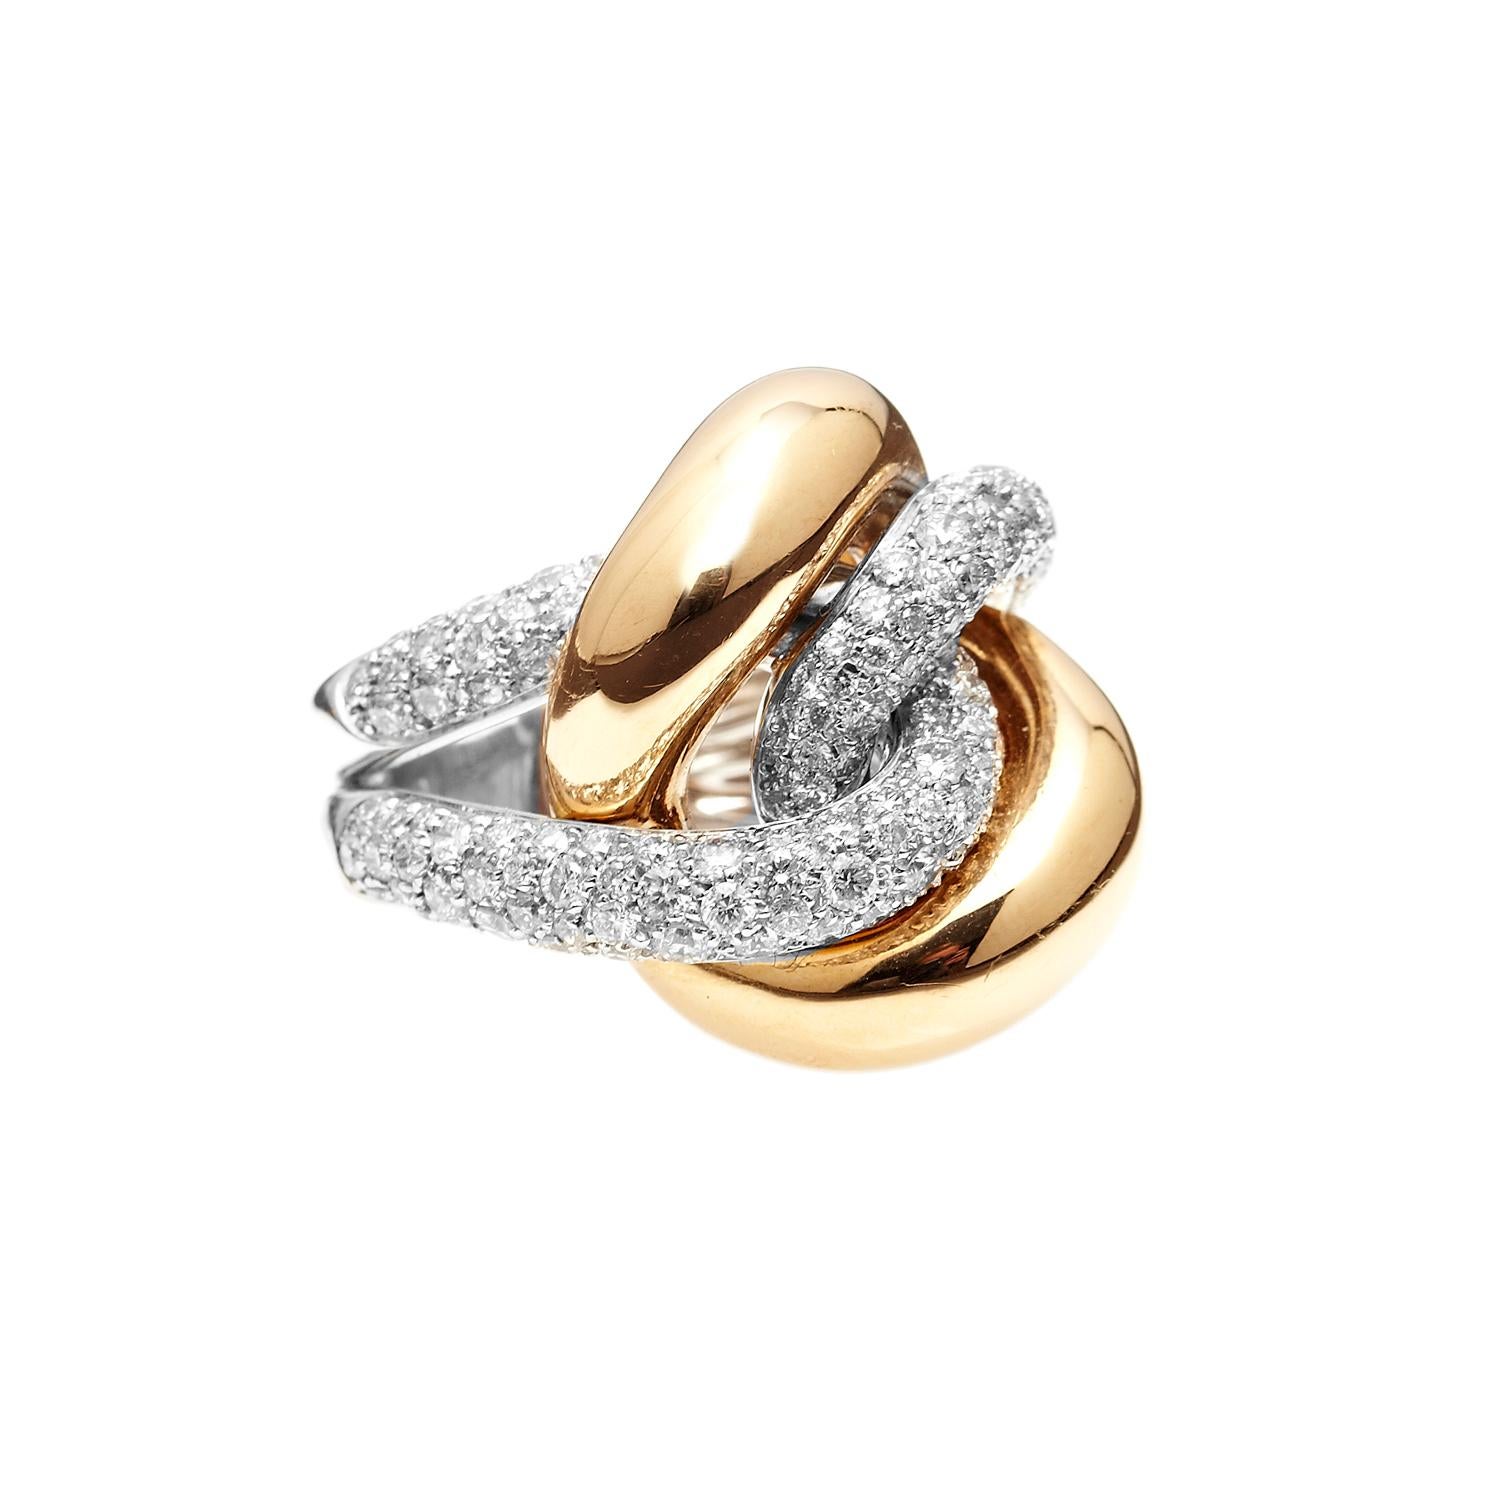 This stunning piece has amazing flowing lines with diamond interlocking and really special use of two gold tones. Its not for the faint of heart, featuring 3.3ct of diamonds and almost 30 grams of 18kt gold.